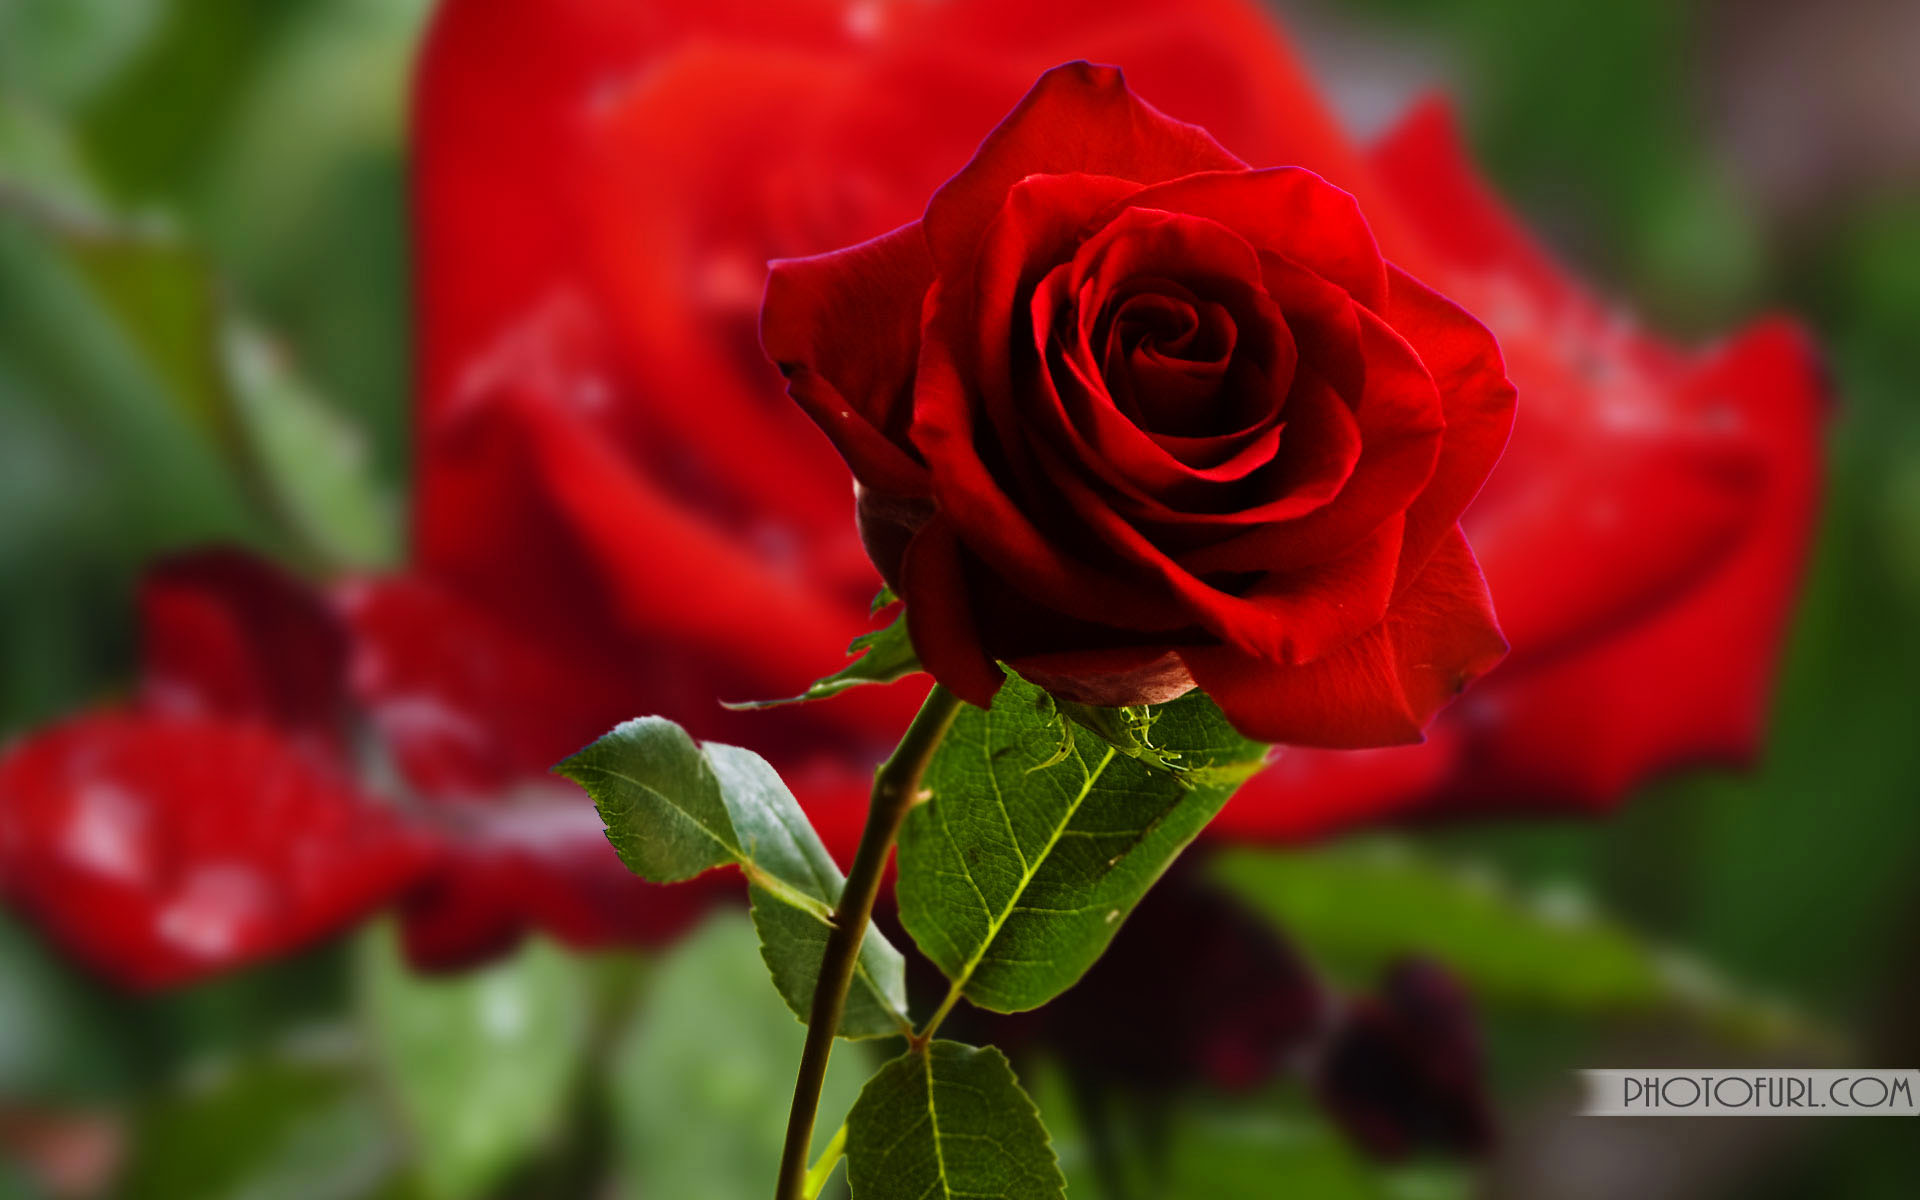 most beautiful roses wallpapers,flower,rose,garden roses,flowering plant,red